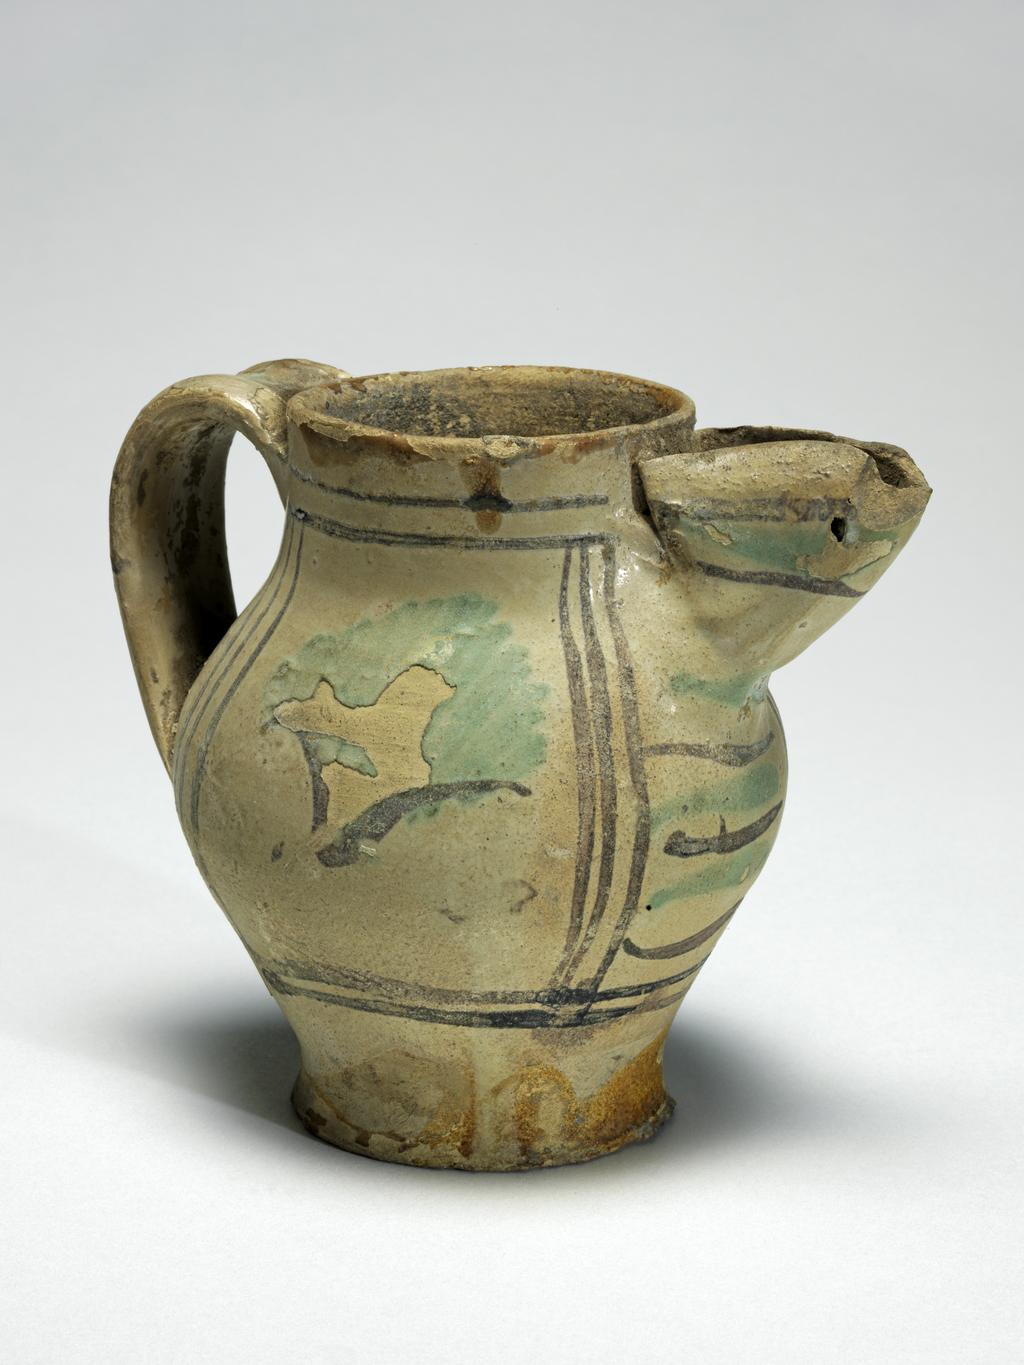 An image of Tin-glazed earthenware jug. Maiolica arcaica. Painted in green and brown with panels, leaves and stripes. Cream earthenware, remnants of lead glaze on lower part and interior, the rest tin-glazed, painted in green and manganese-brown, height 10.3cm, diameter (base) 5.5cm, width (body) 8.8cm, width (handle to spout) 11.4cm, circa 1250-1300. From Umbria, Italy. Medieval.